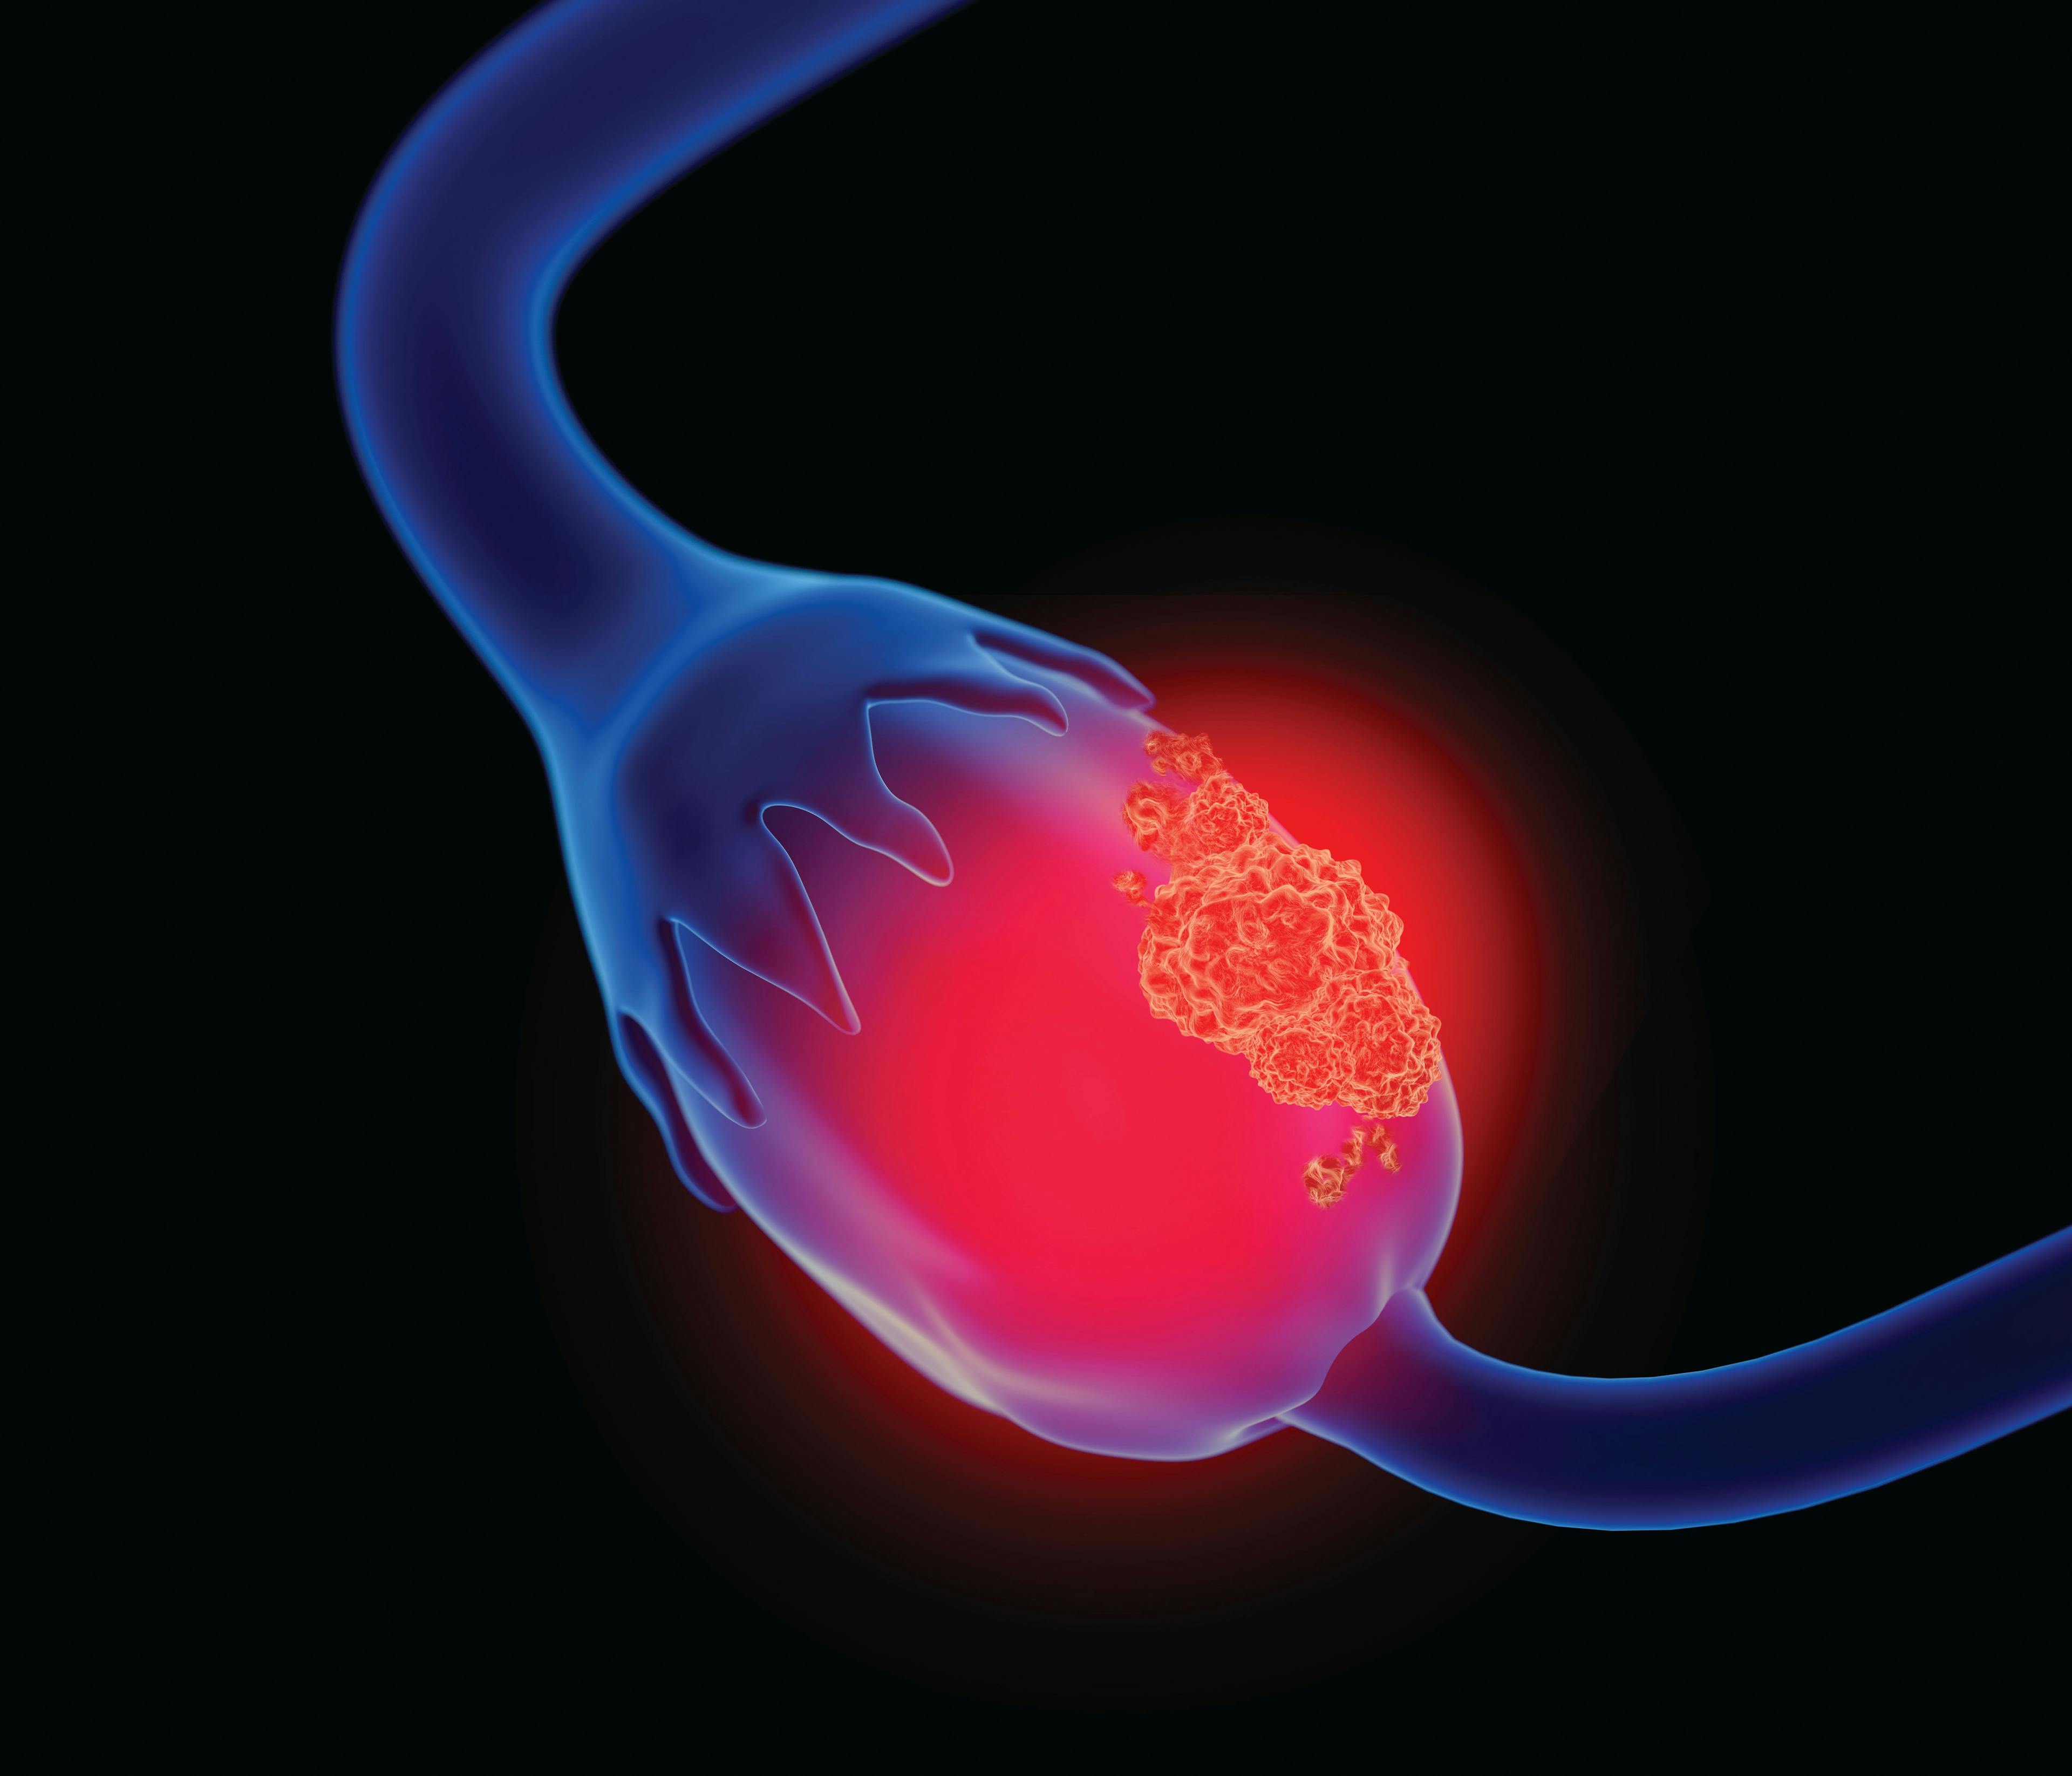 Imaging drug imaging drug pafolacianine was approved by the FDA to detect ovarian cancer lesions in patients during surgery.